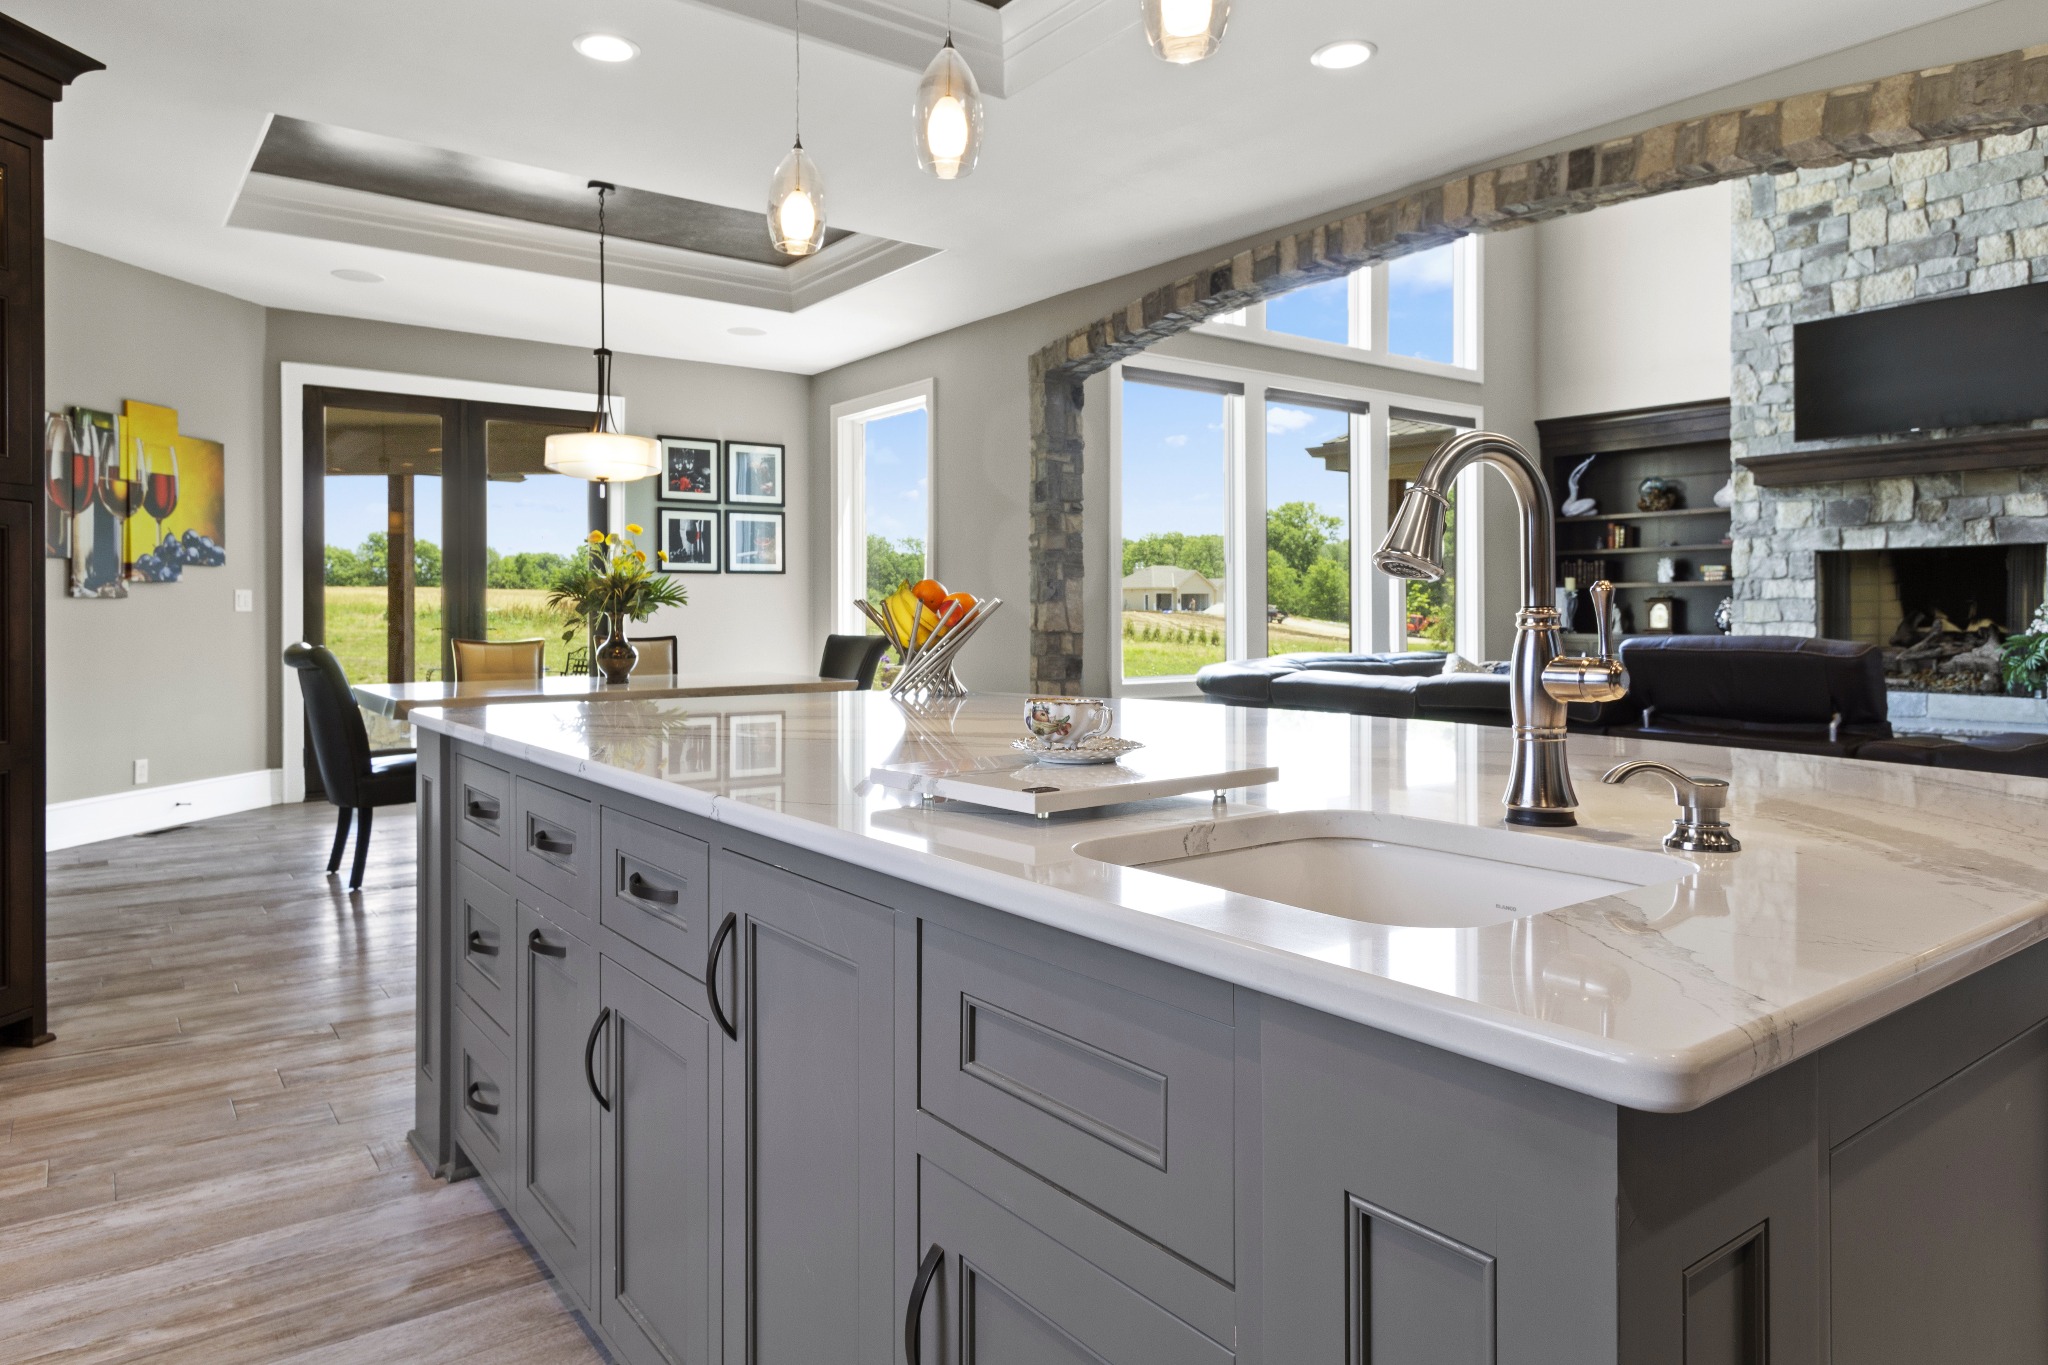 A luxury kitchen with gray cabinets and stone counters.